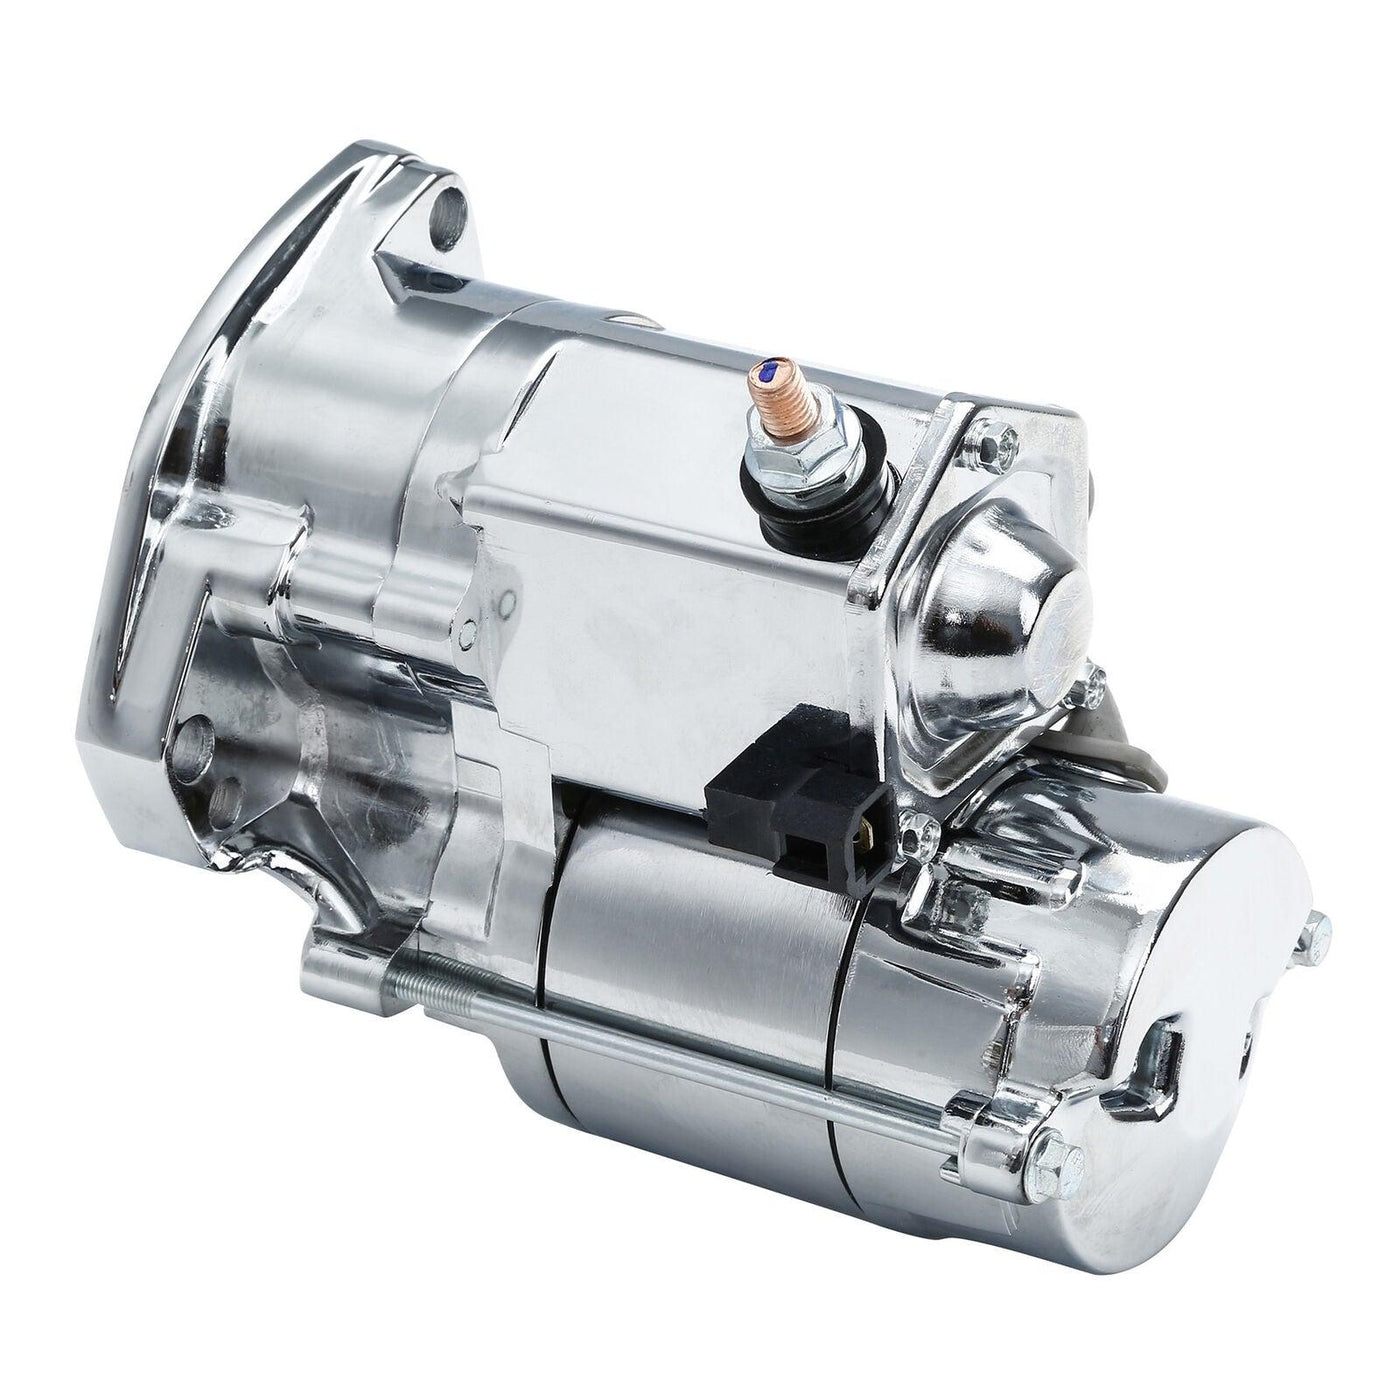 1.4KW CW Starter Motor For Harley Touring Street Glide FLHX Softail Deluxe FLSTN - Moto Life Products